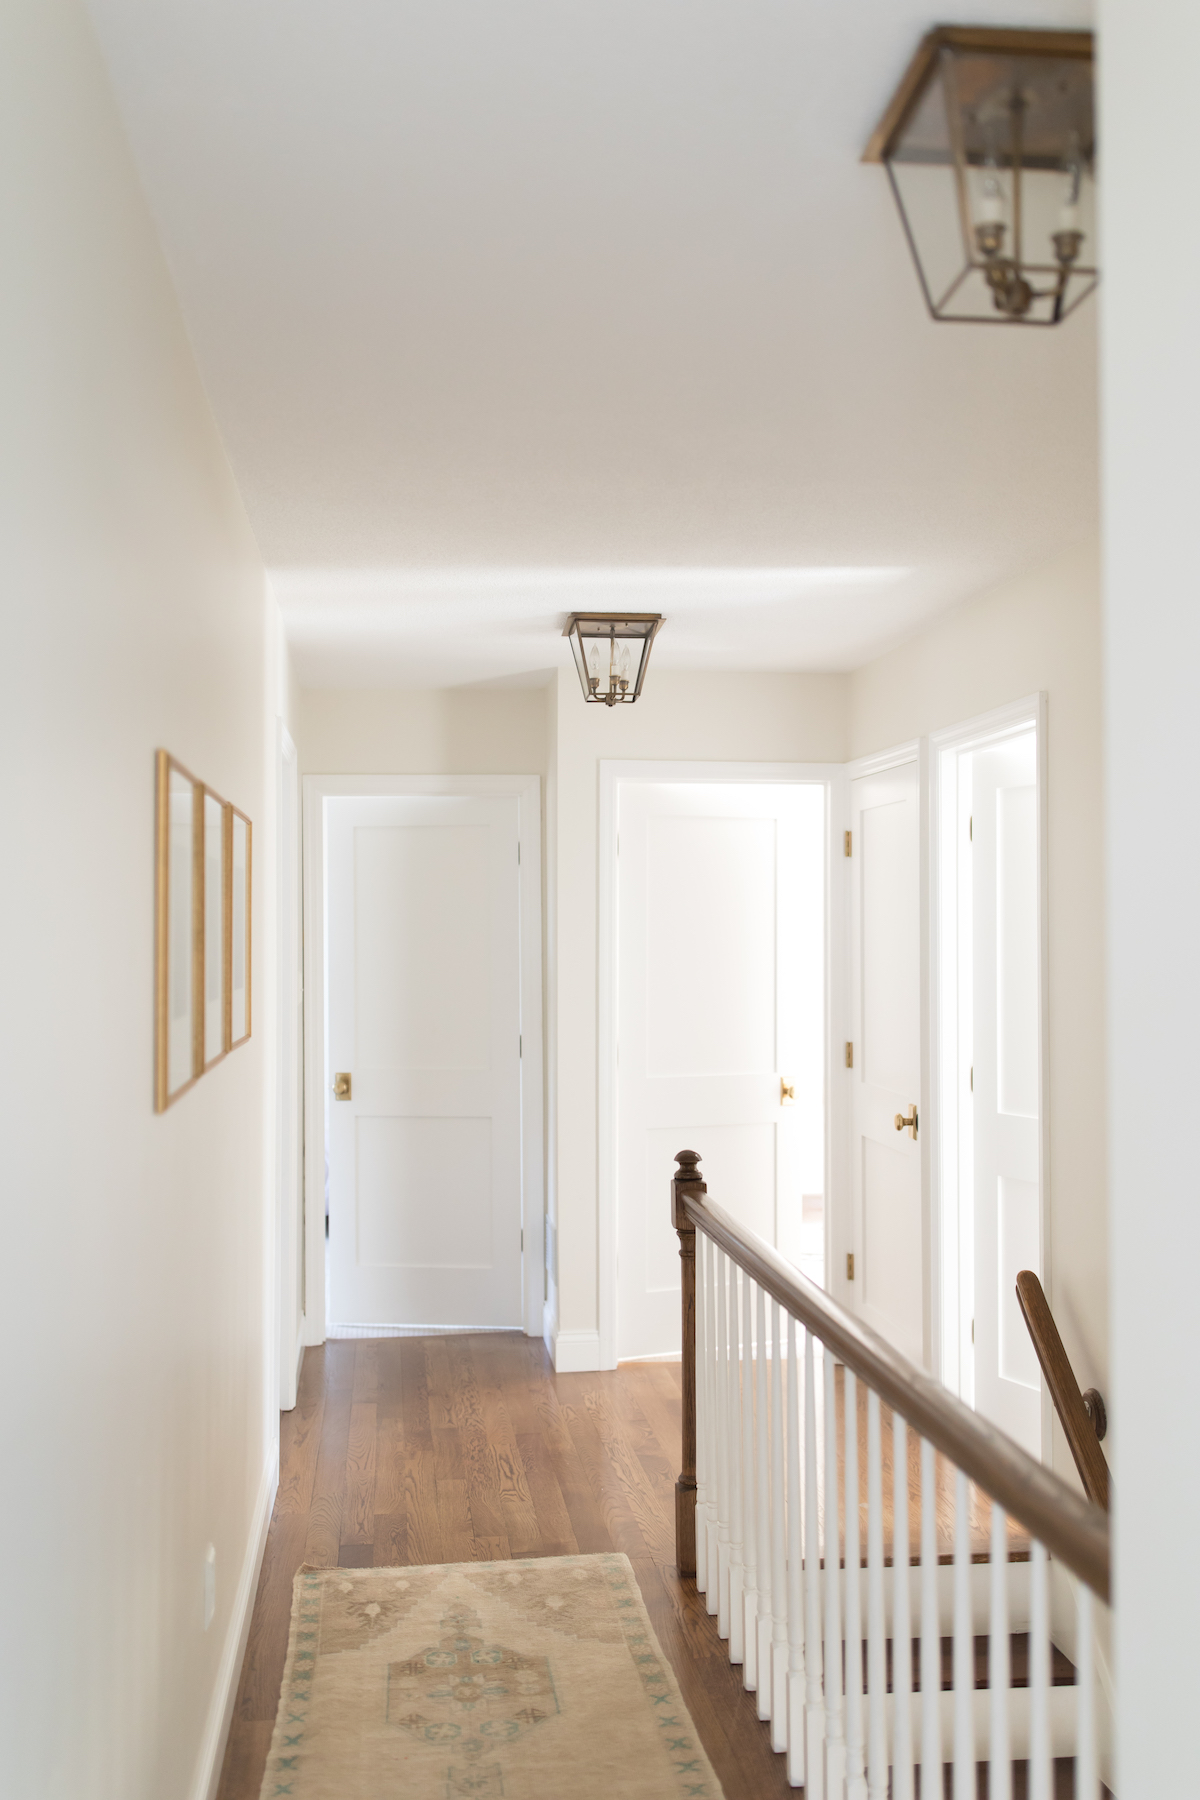 A hallway with white shaker doors and wood floors